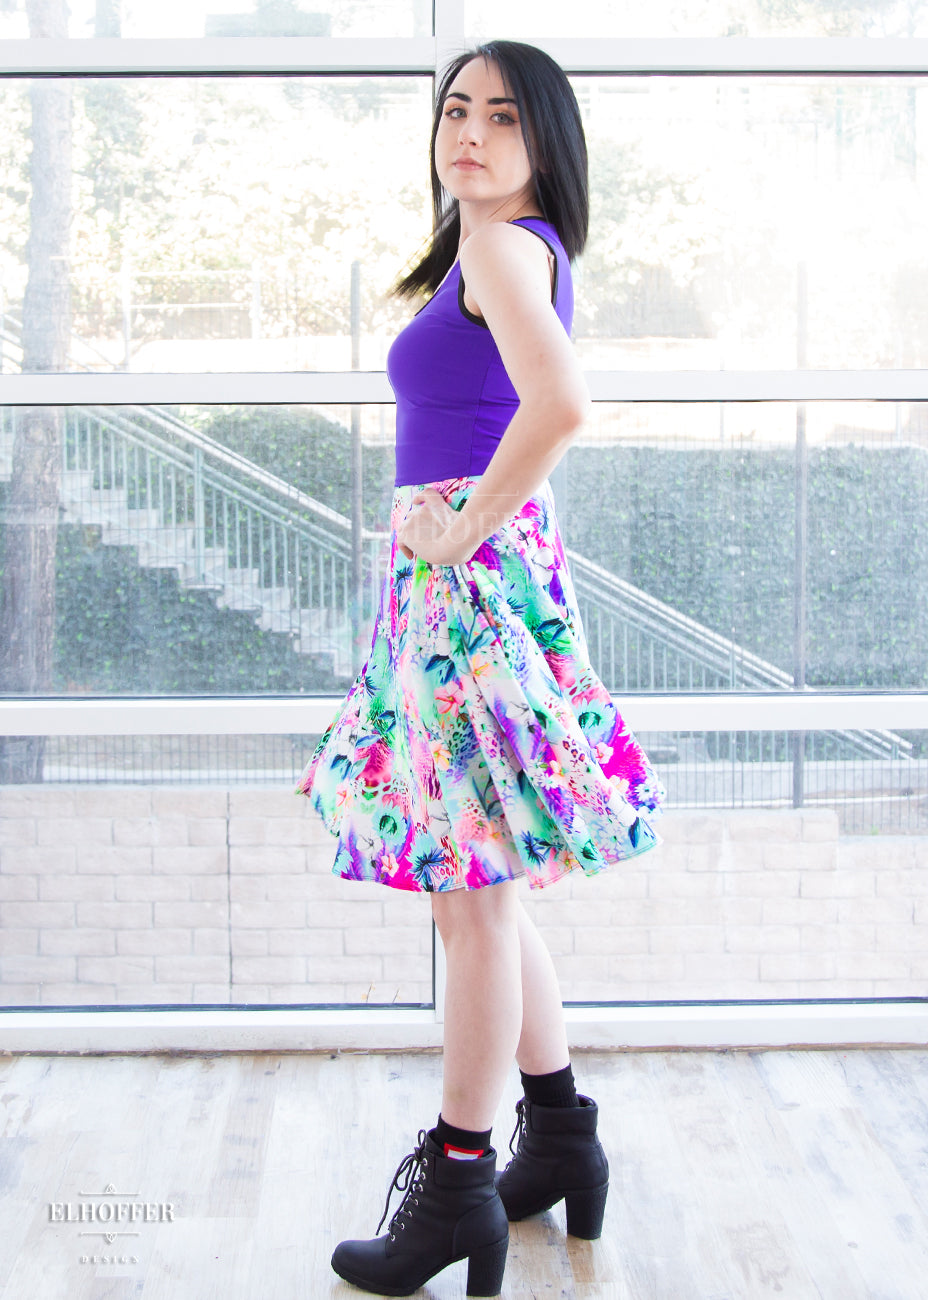 Amy, a fair skinned size small model with short dark hair, wears a high-waisted knee length full skirt with a fitted matching waistband encased with elastic in our rainbow jungle. The pattern is bright blue, pink and green with tropical flowers.